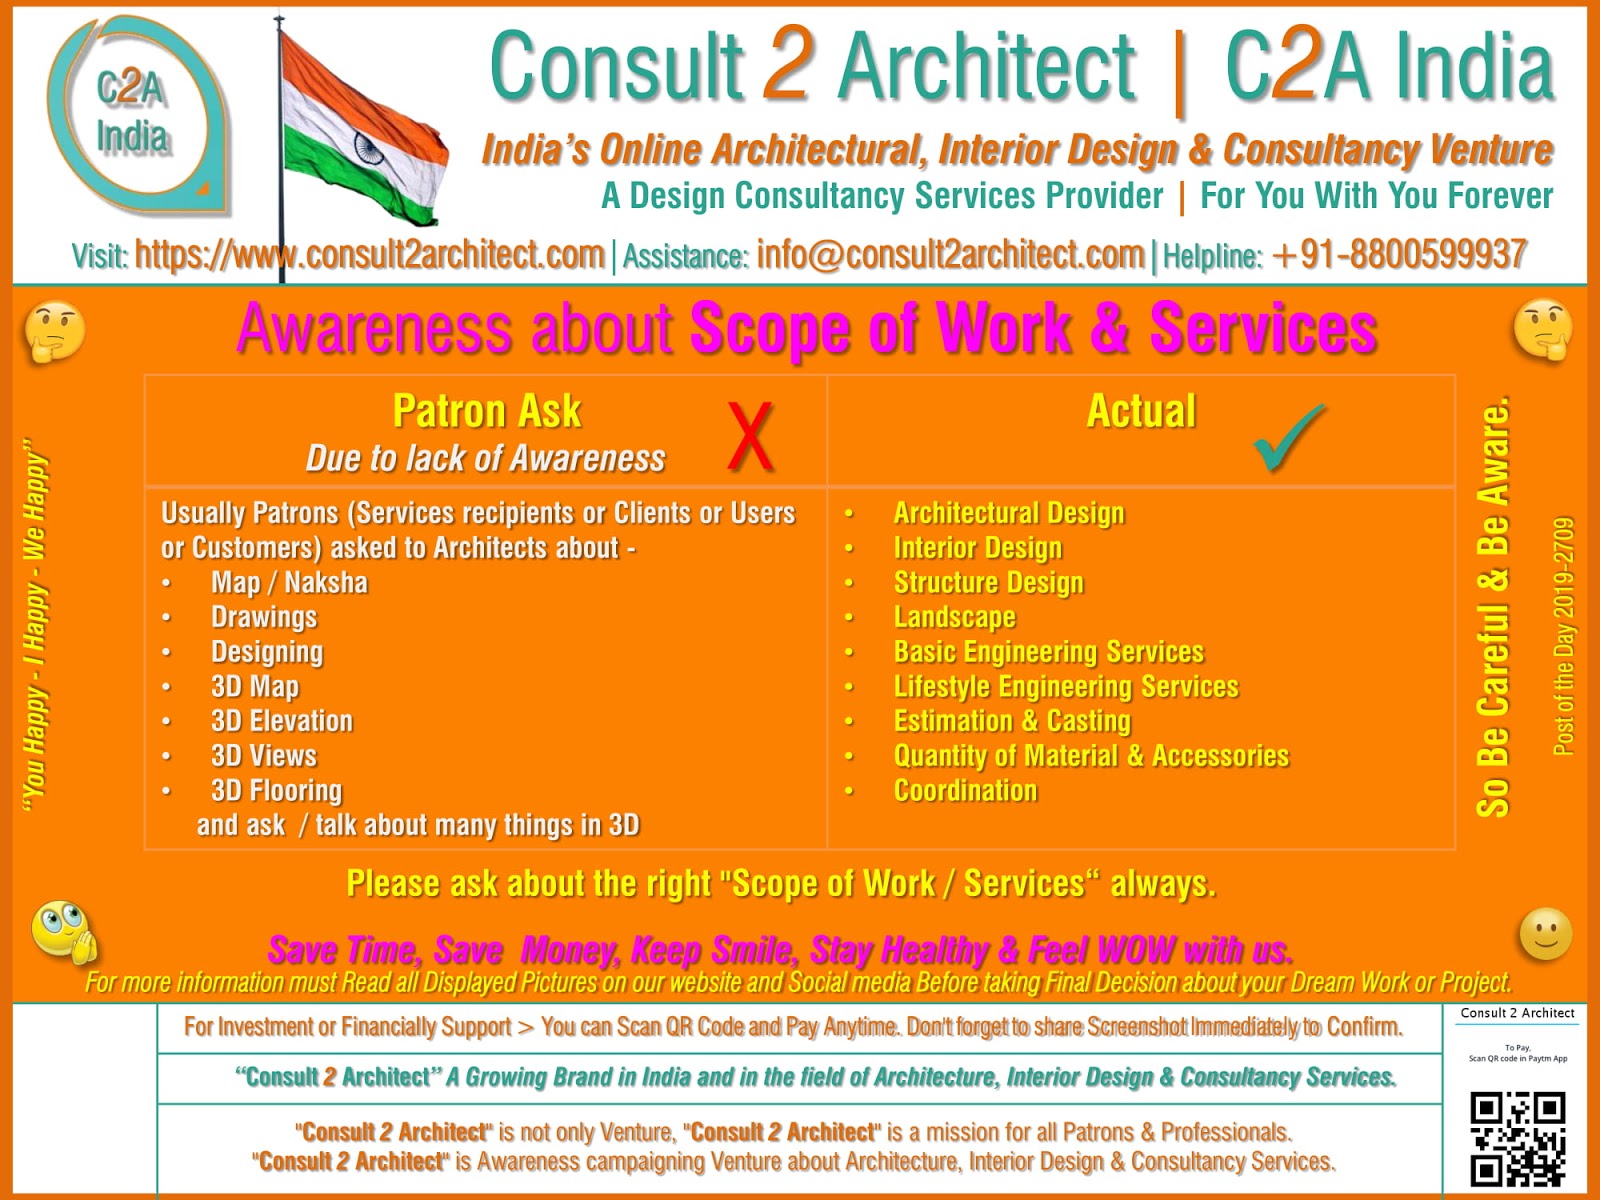 C2a India Consult 2 Architect Post Awareness About Scope